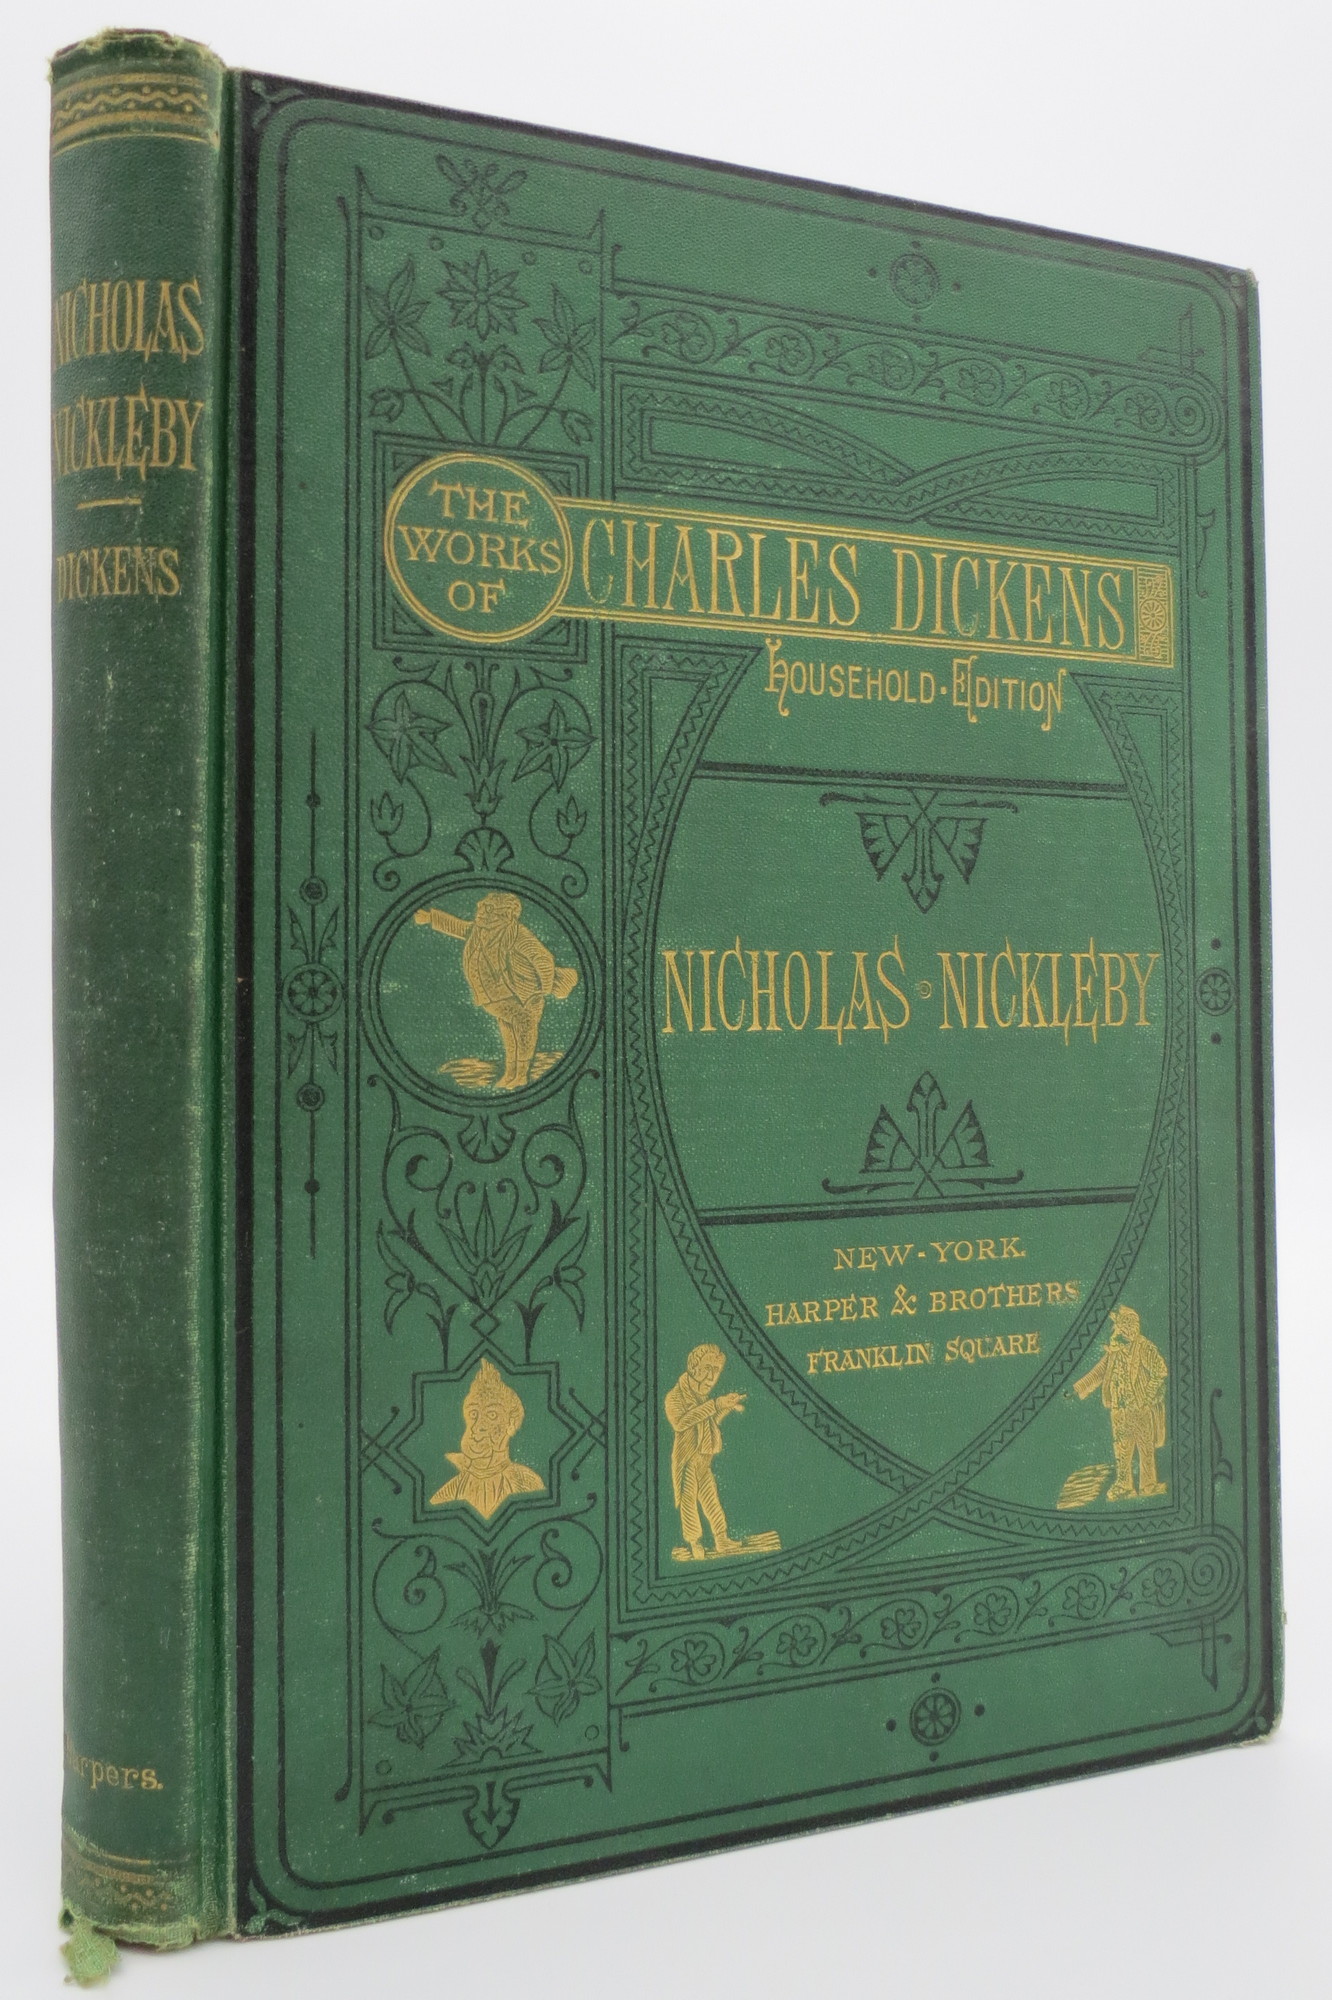 Image for THE LIFE AND ADVENTURES OF NICHOLAS NICKLEBY (FROM THE WORKS OF CHARLES DICKENS HOUSEHOLD EDITION)   (Fine Victorian Binding)